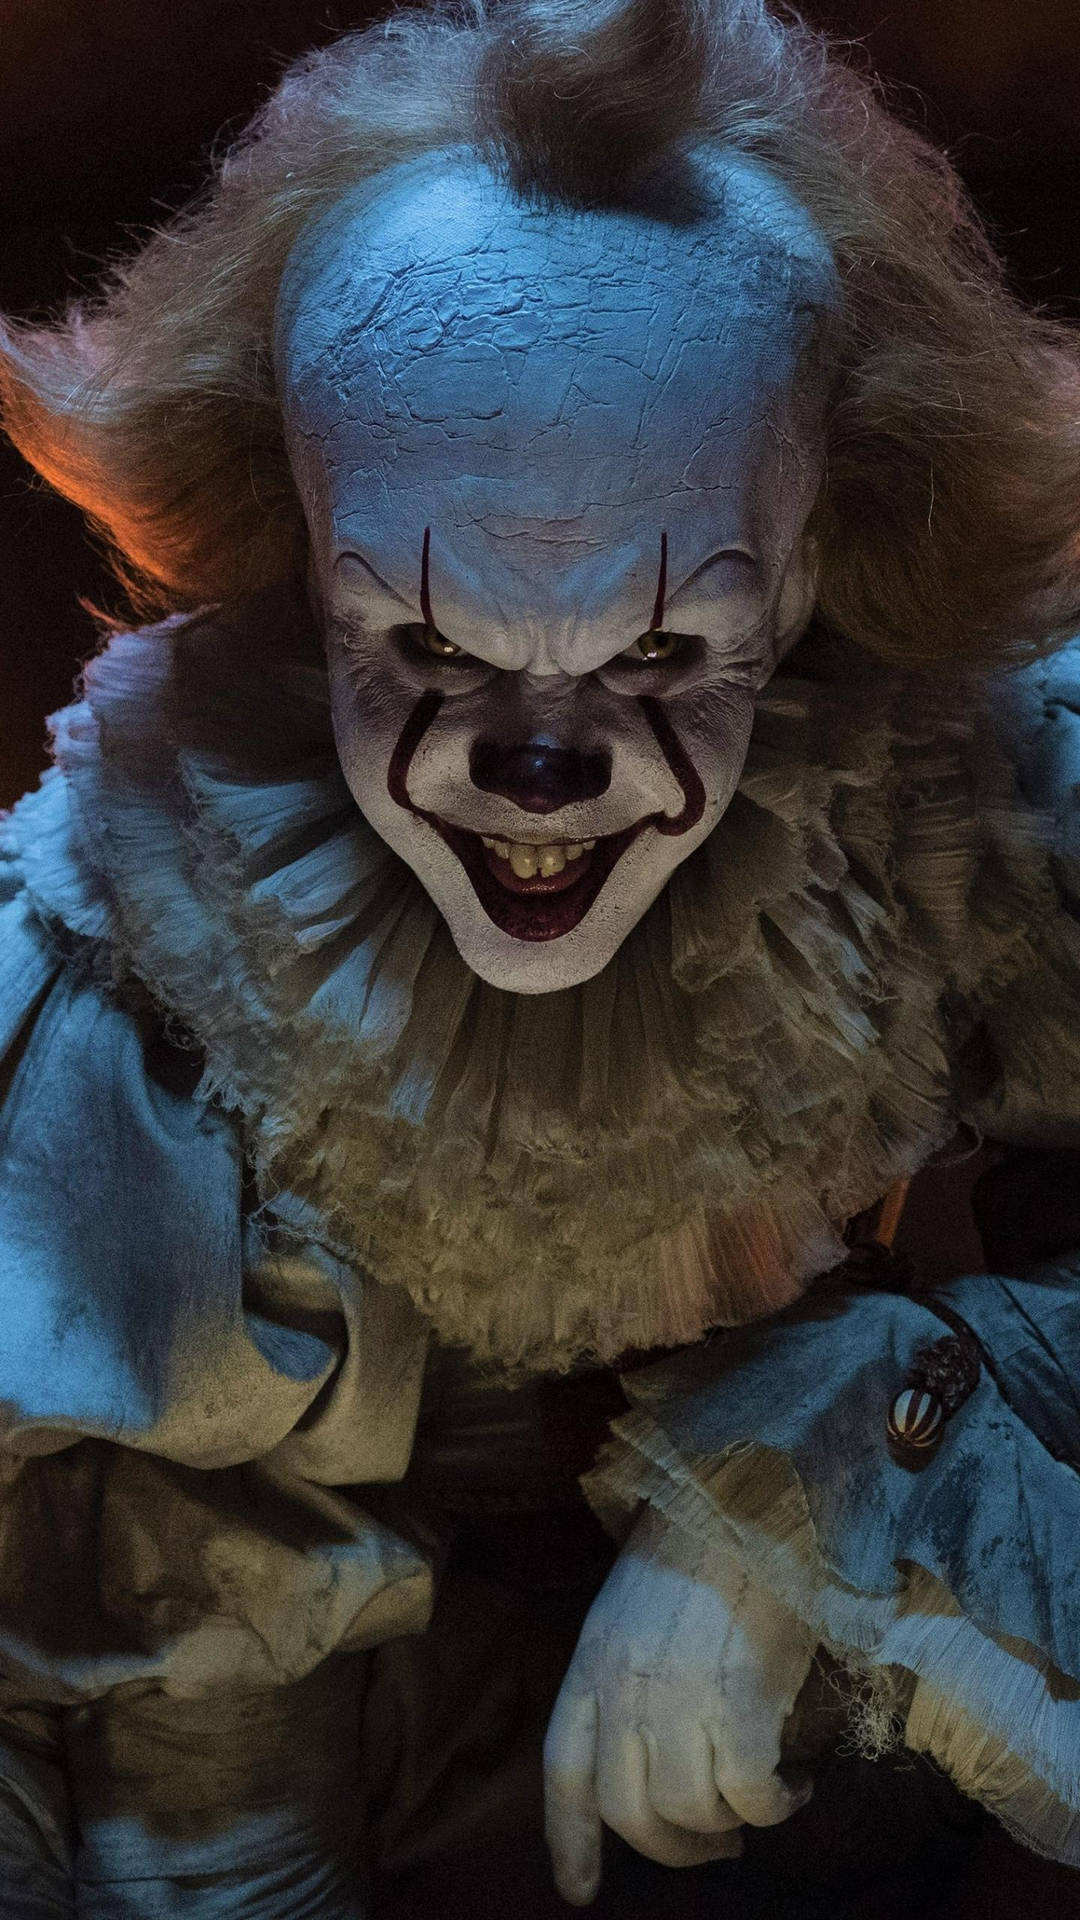 "Hide or face the terror of Pennywise" Wallpaper